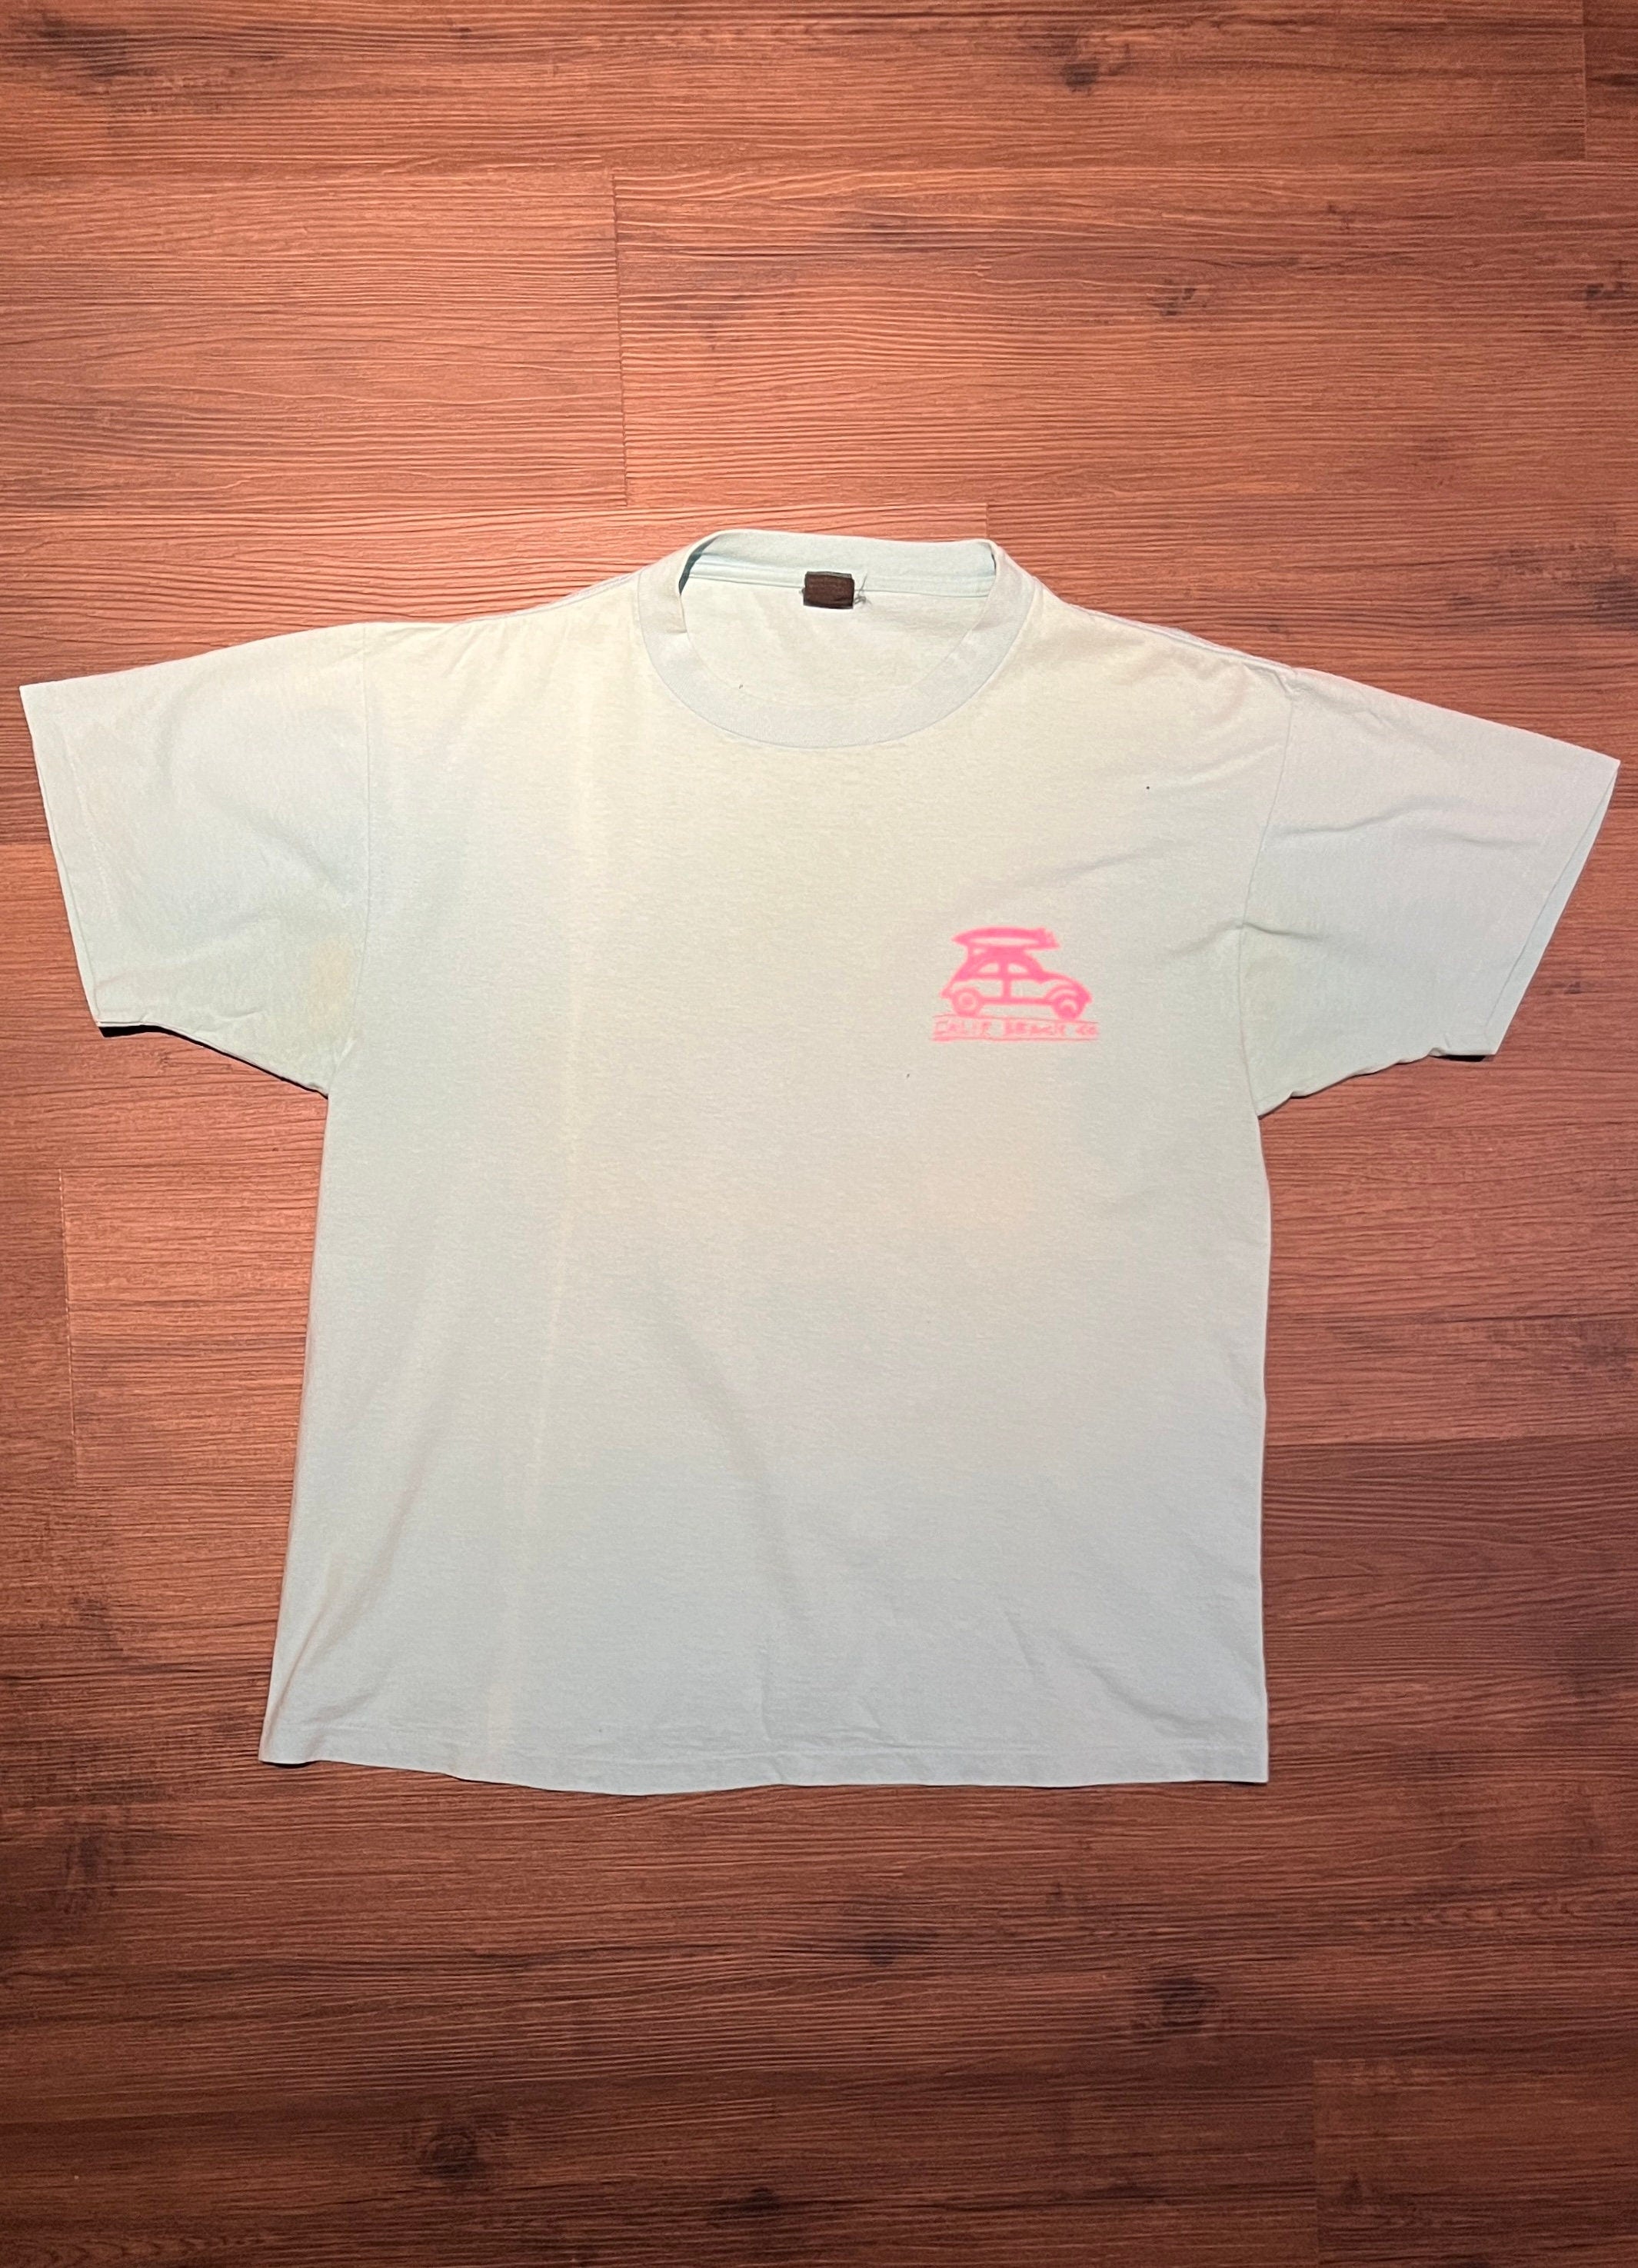 California Beach Co. Graphic Tee | Size X-Large | Vintage 1990s